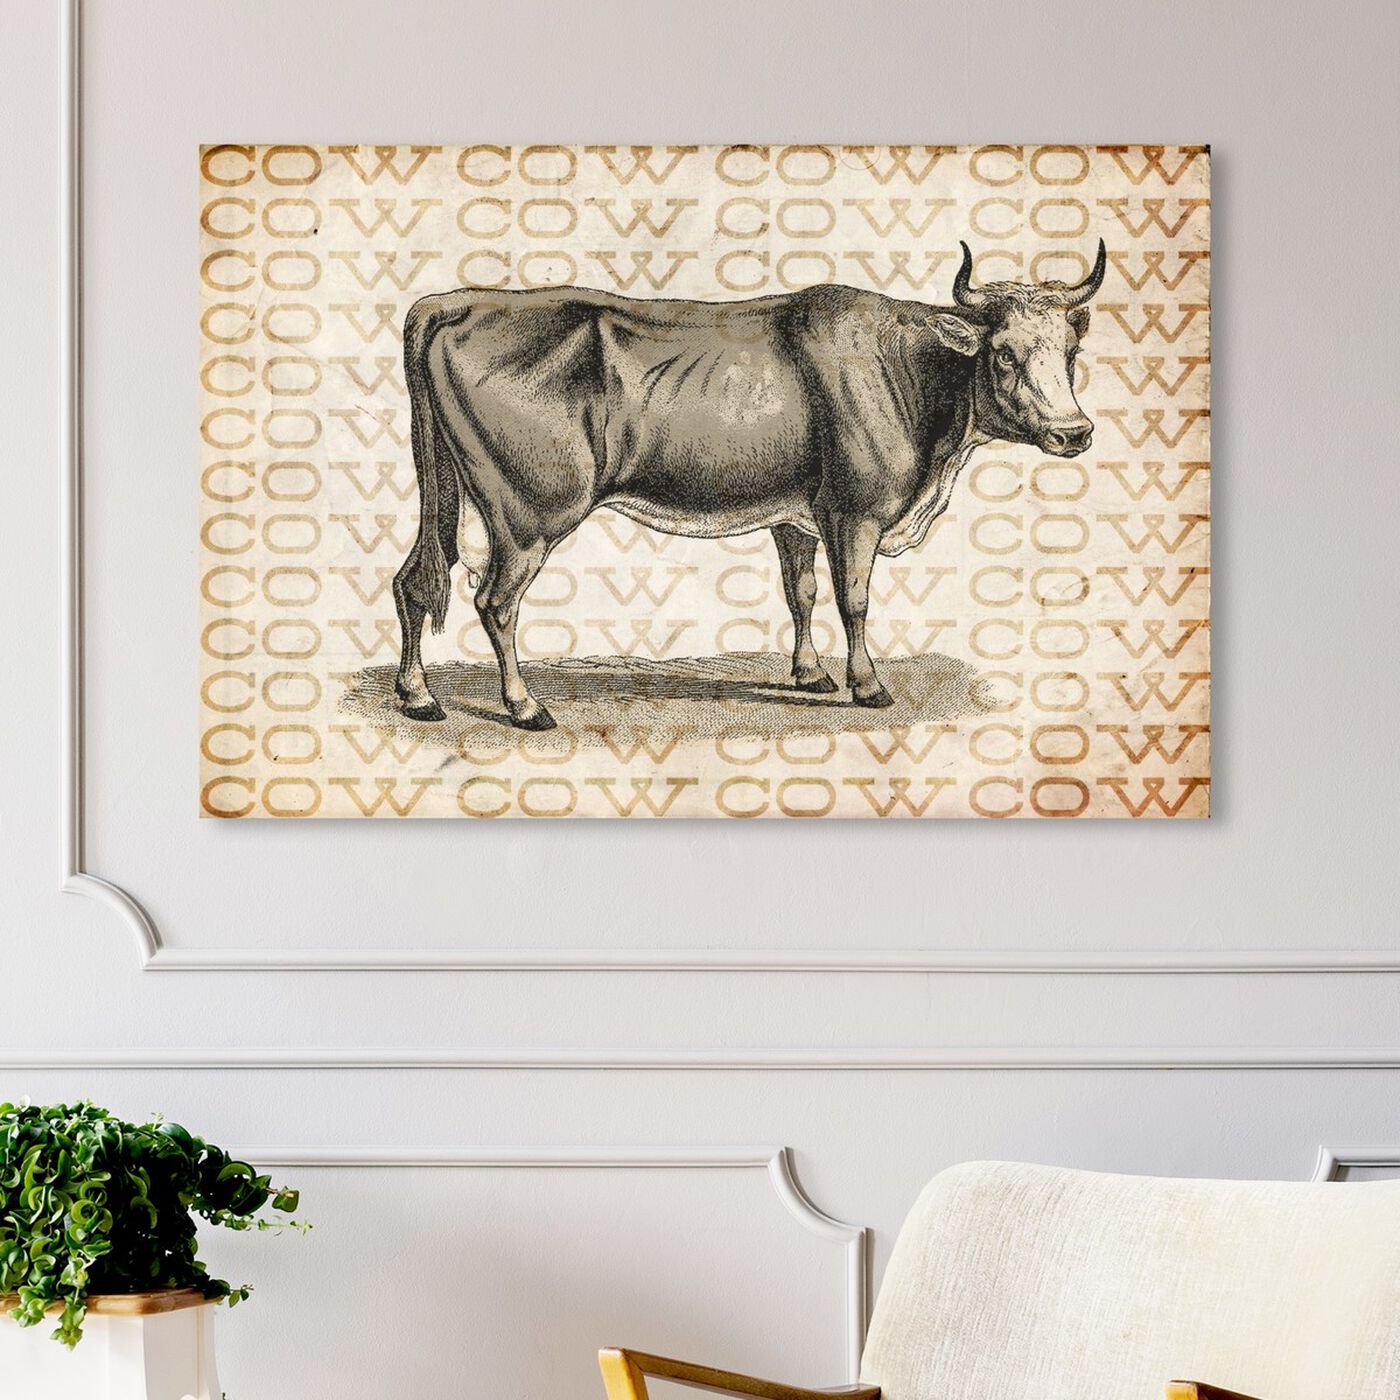 Hanging view of Cow featuring animals and farm animals art.